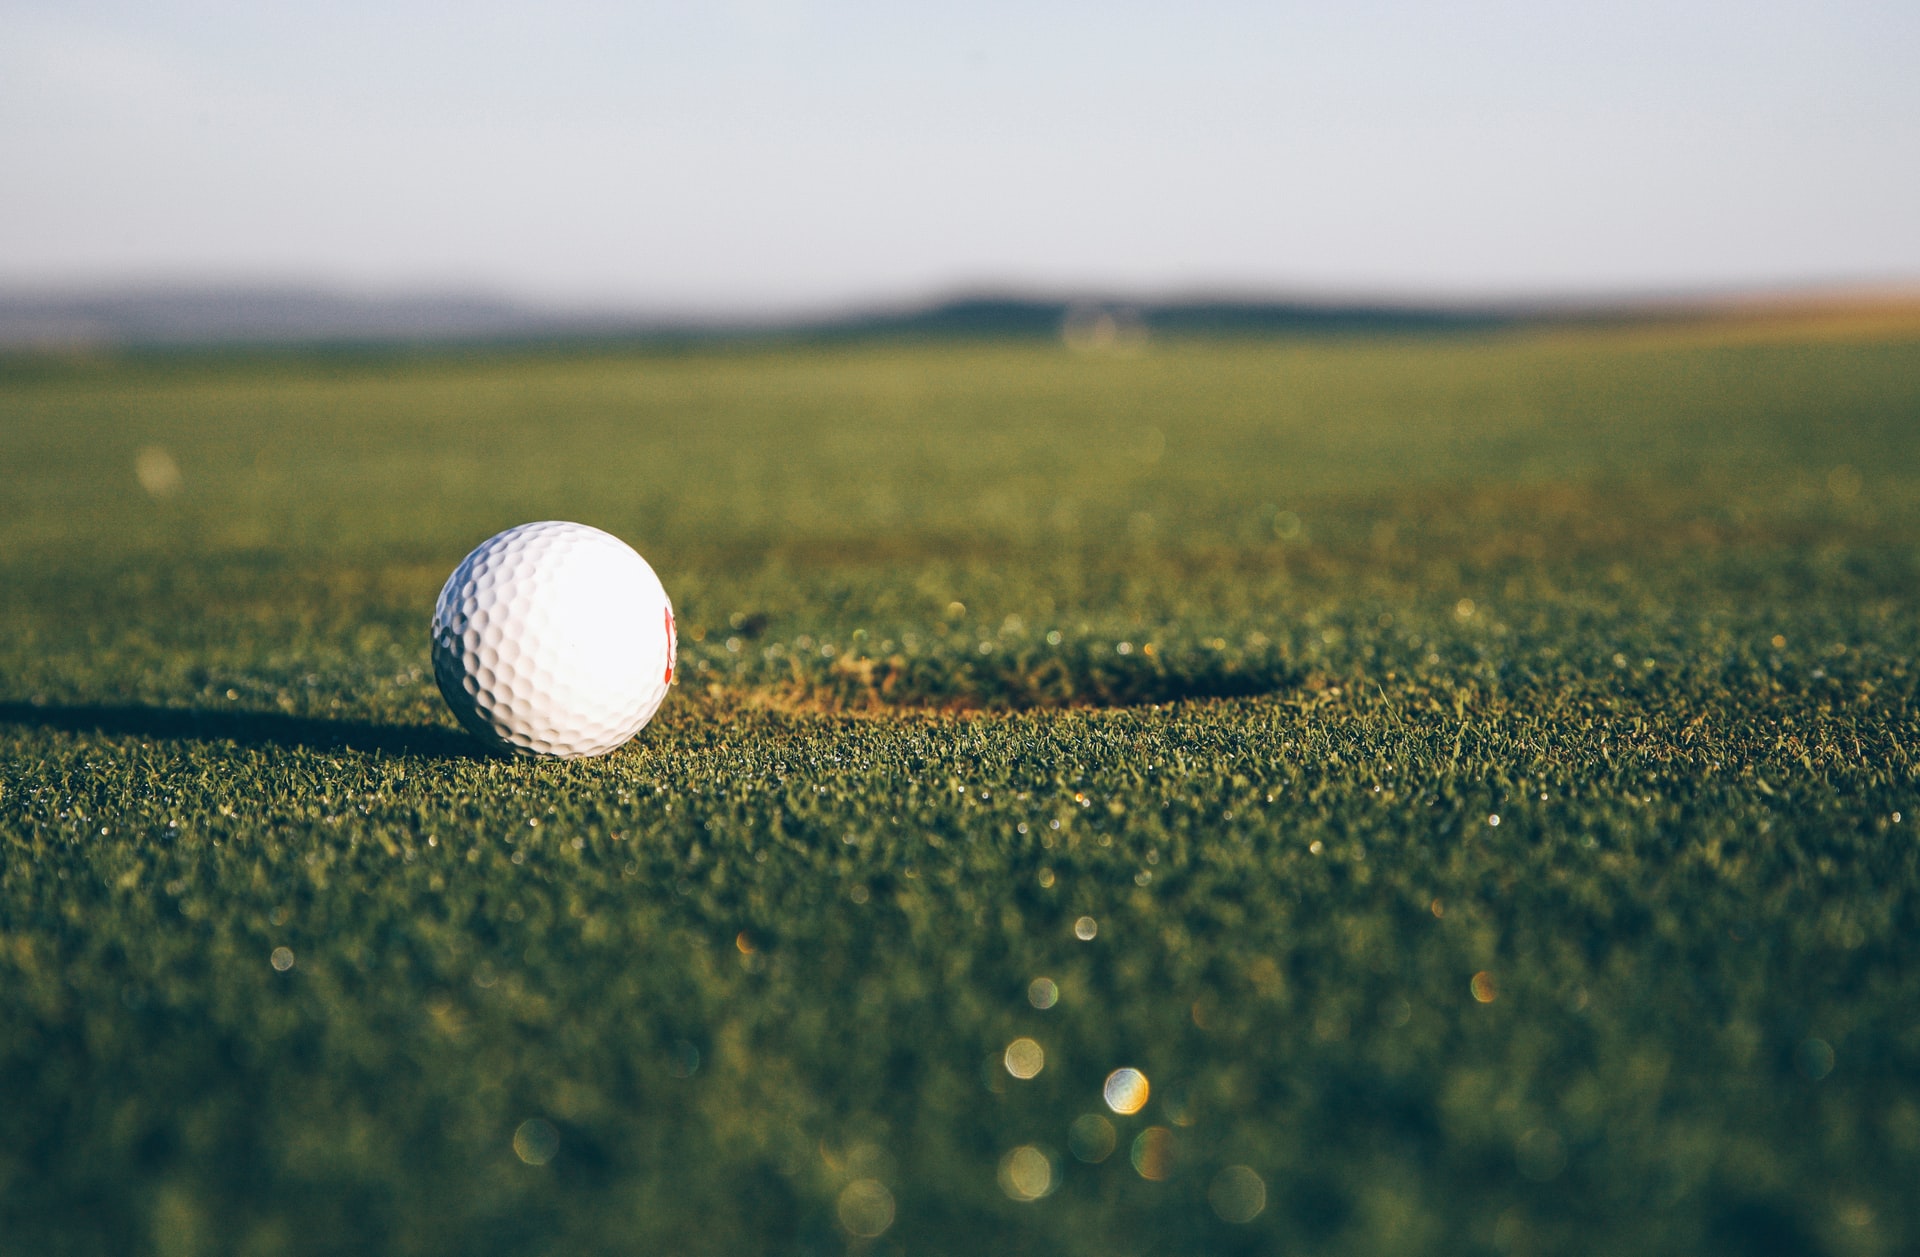 View past and current information about the Foundation's annual golf tournament